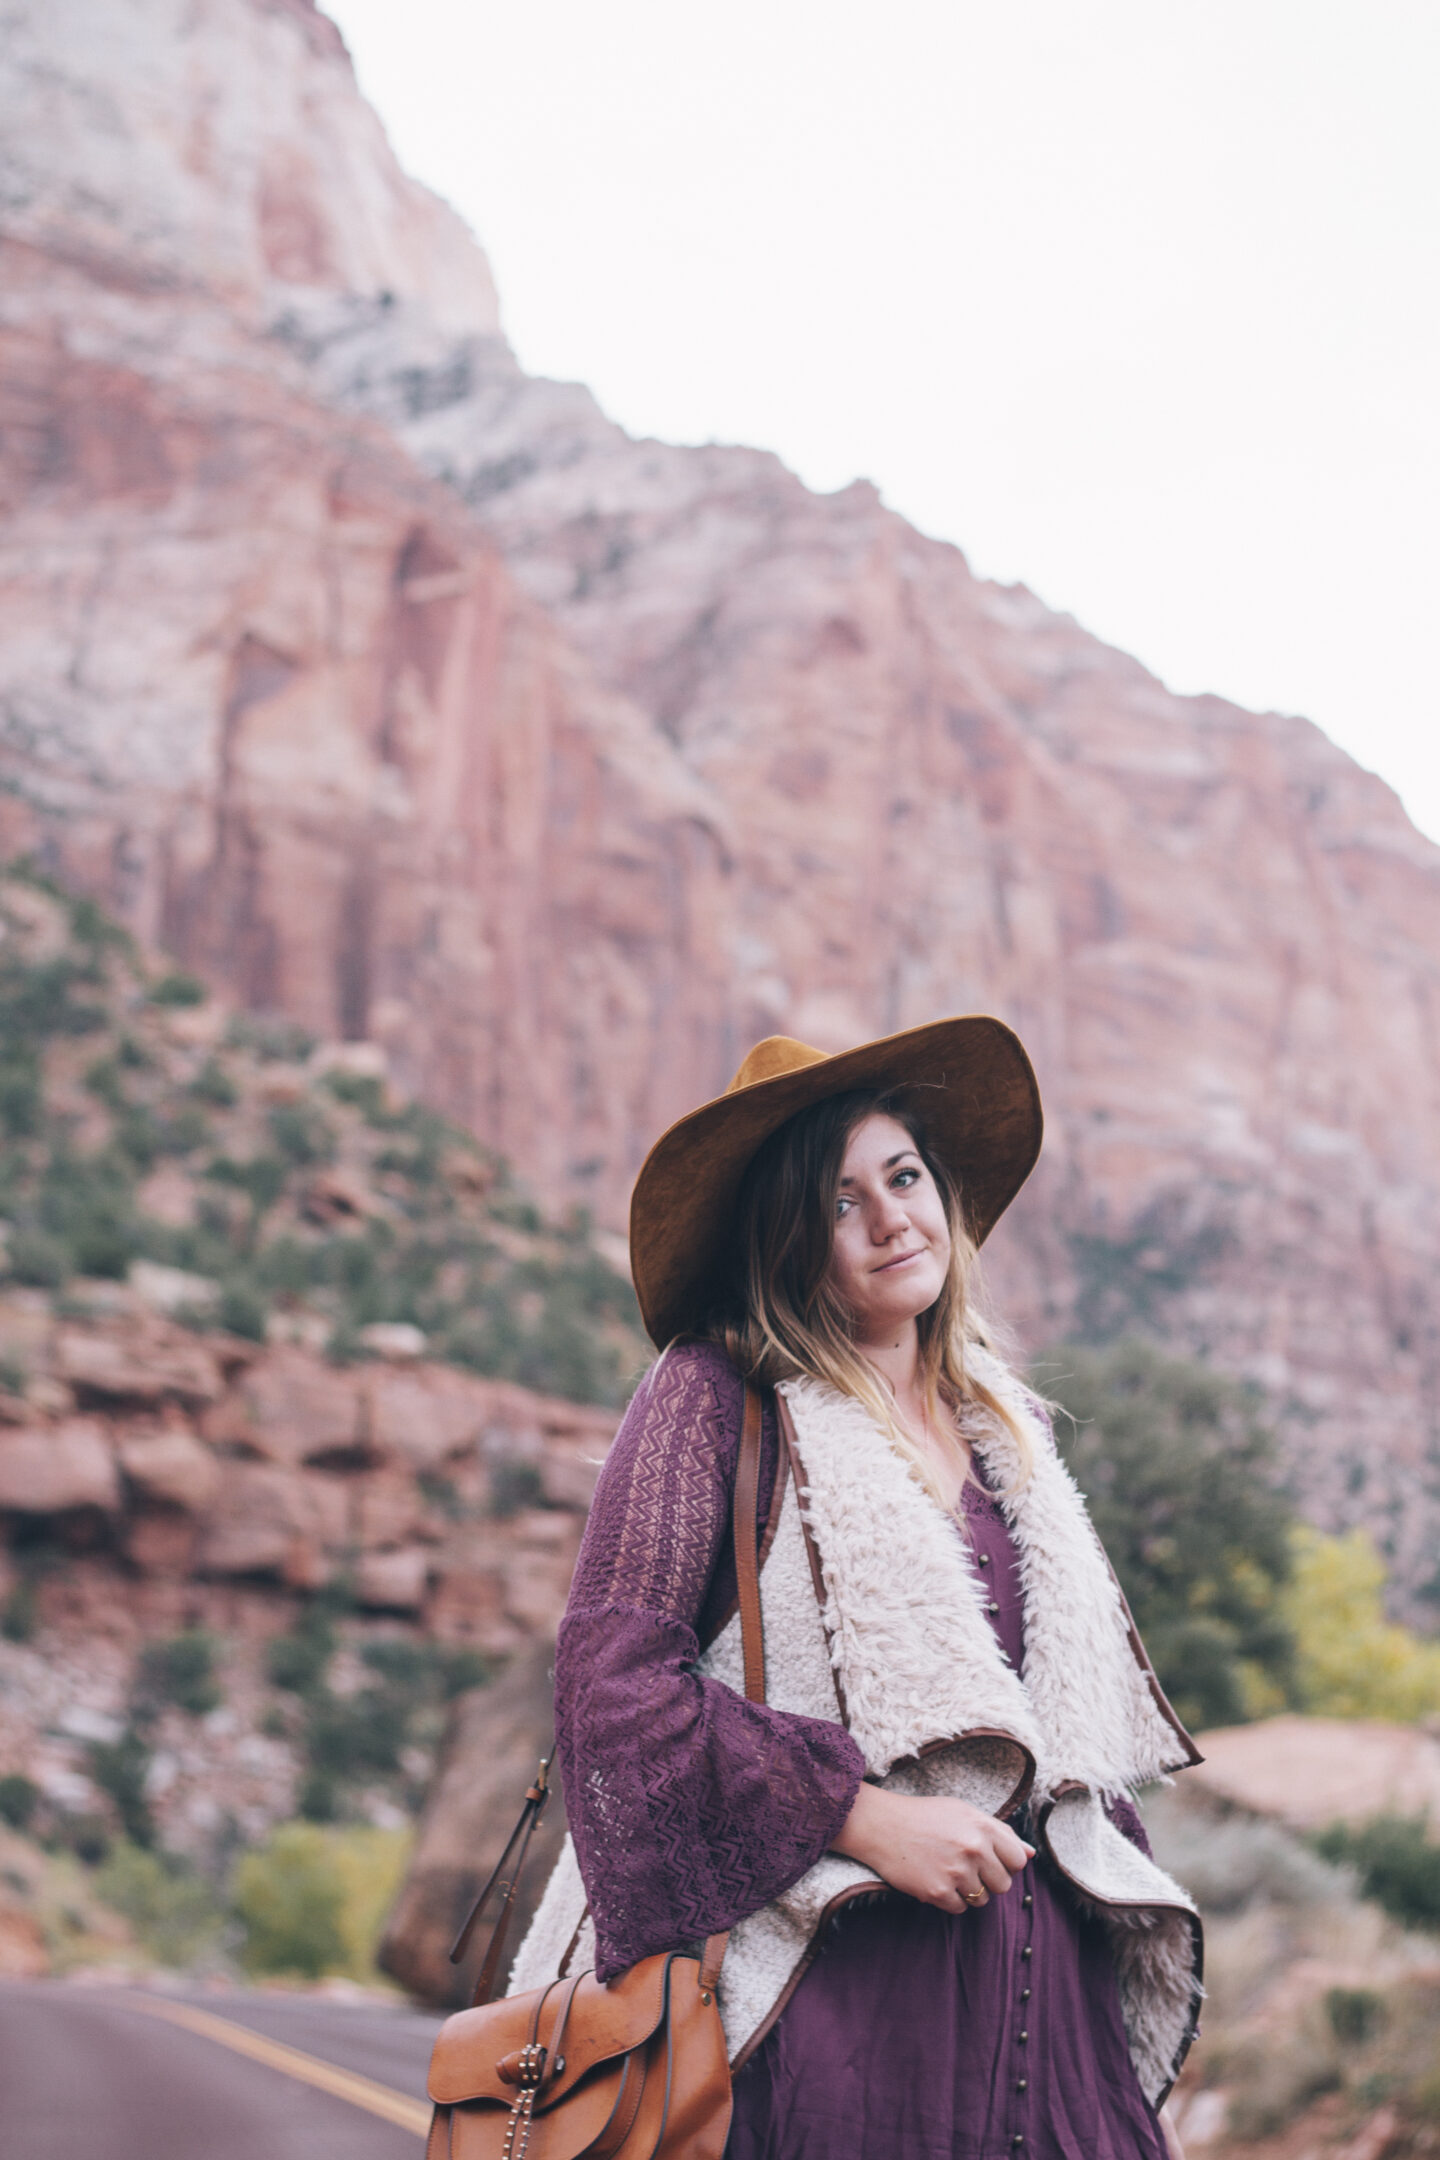 boho outfit in zion national park